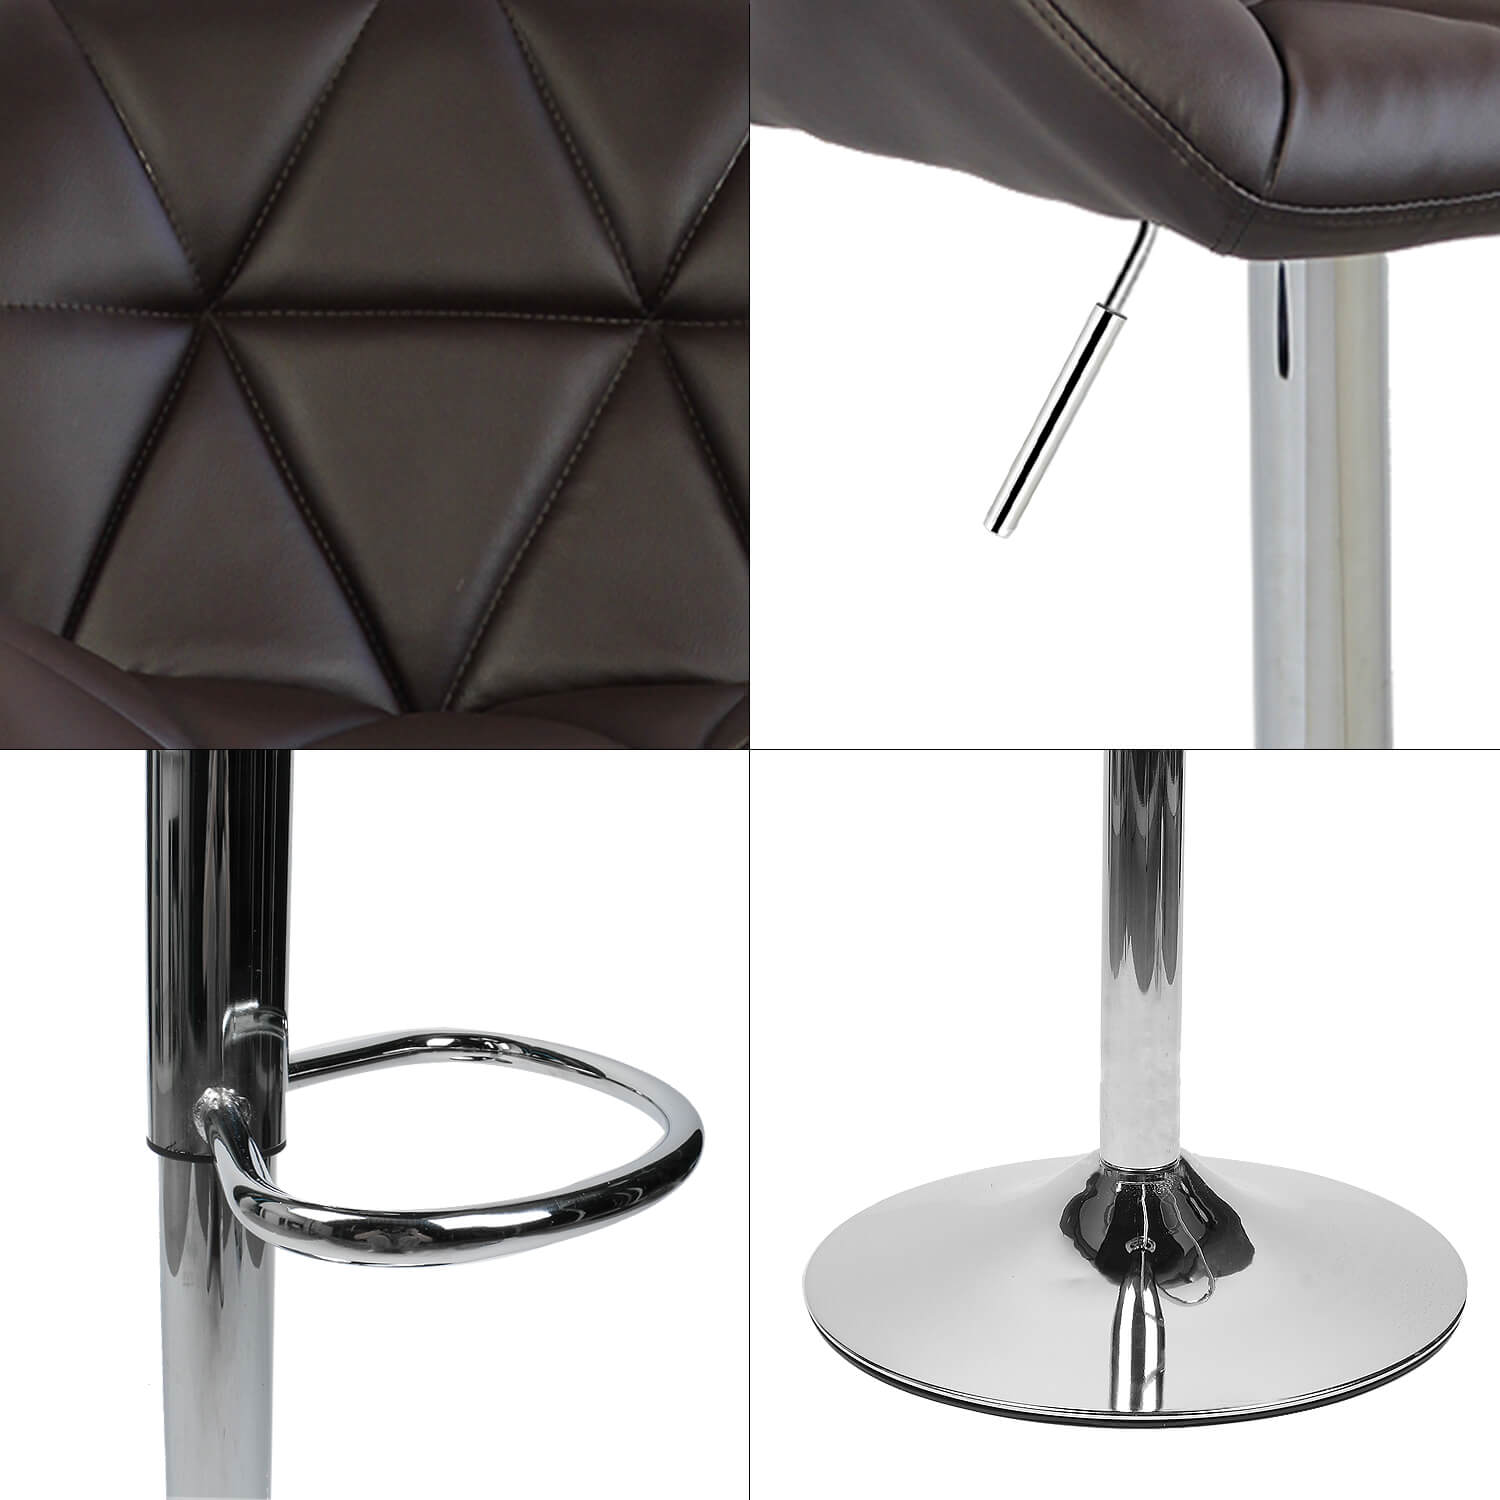 Feature details of Elecwish brown bar stools